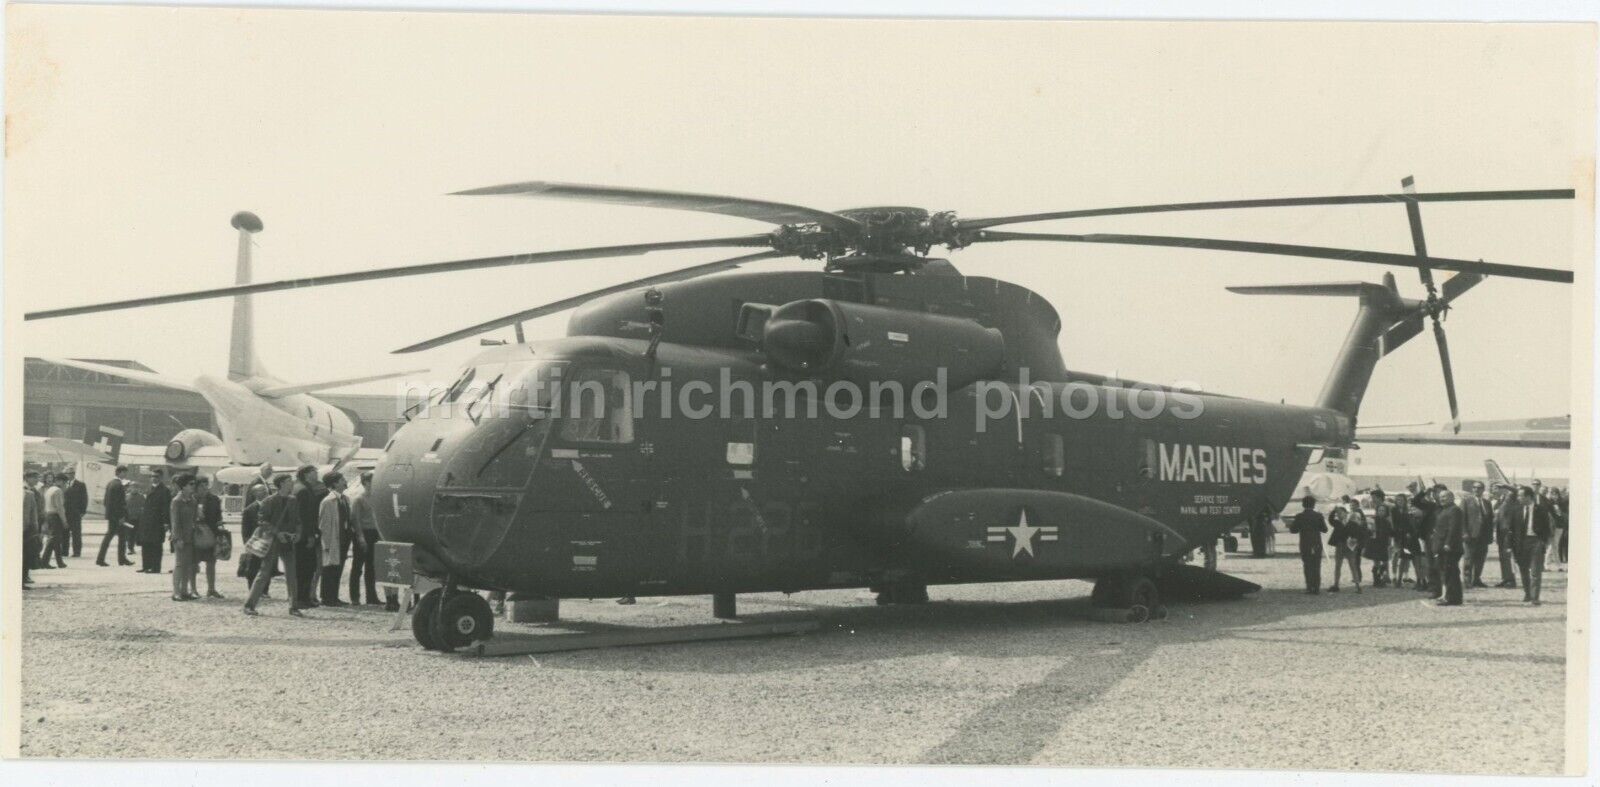 US Marines Sikorsky CH-53A Sea Stallion Helicopter Photo, BZ977